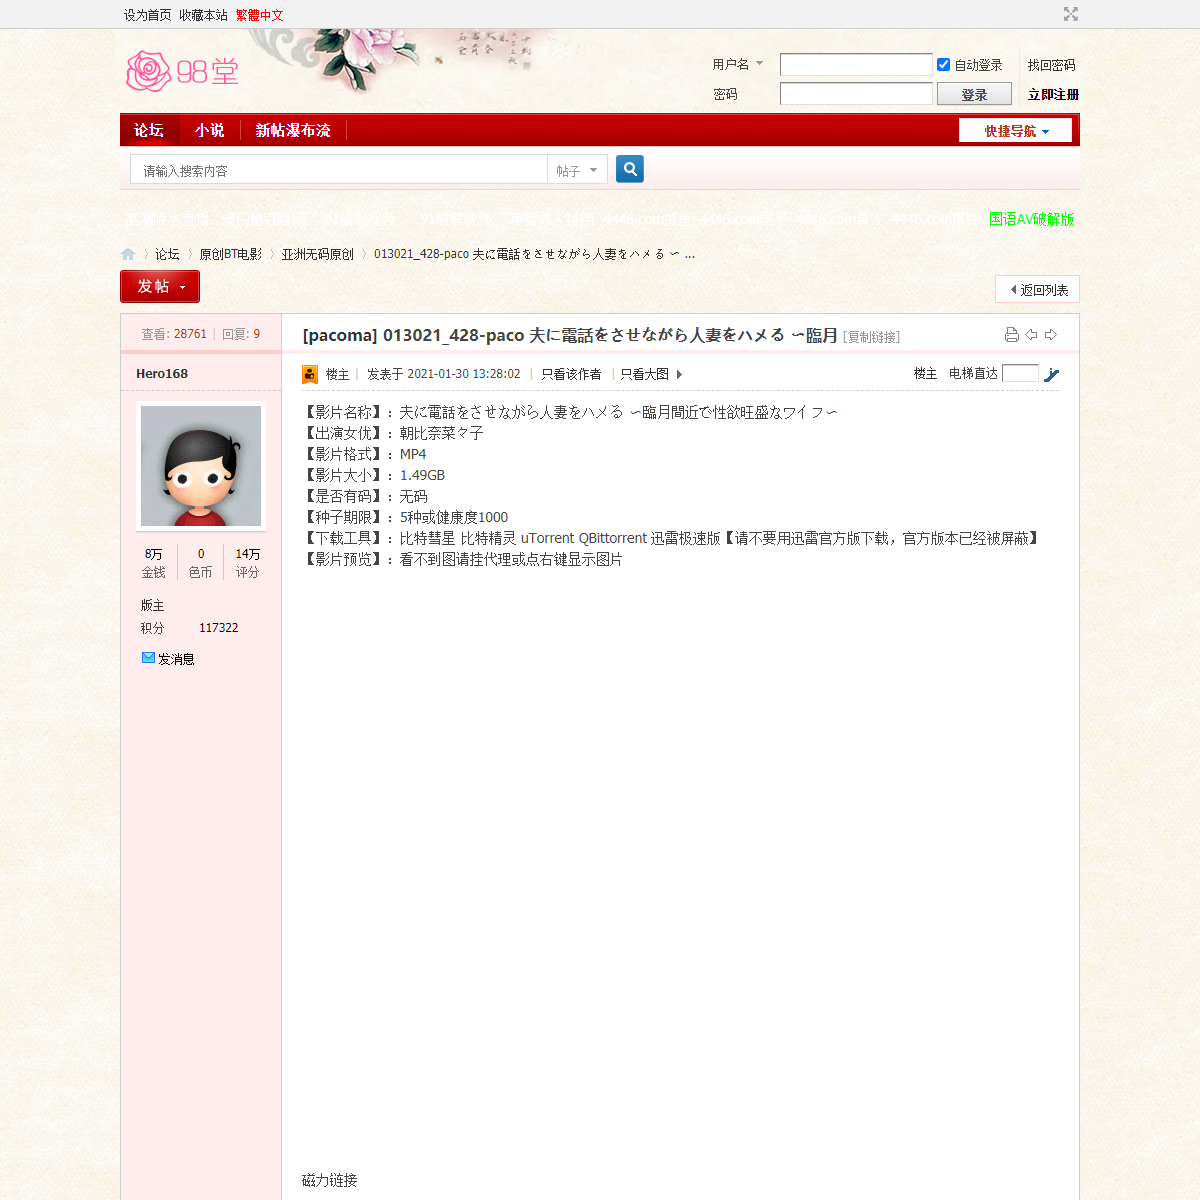 A complete backup of https://www.sehuatang.net/thread-470763-1-1.html